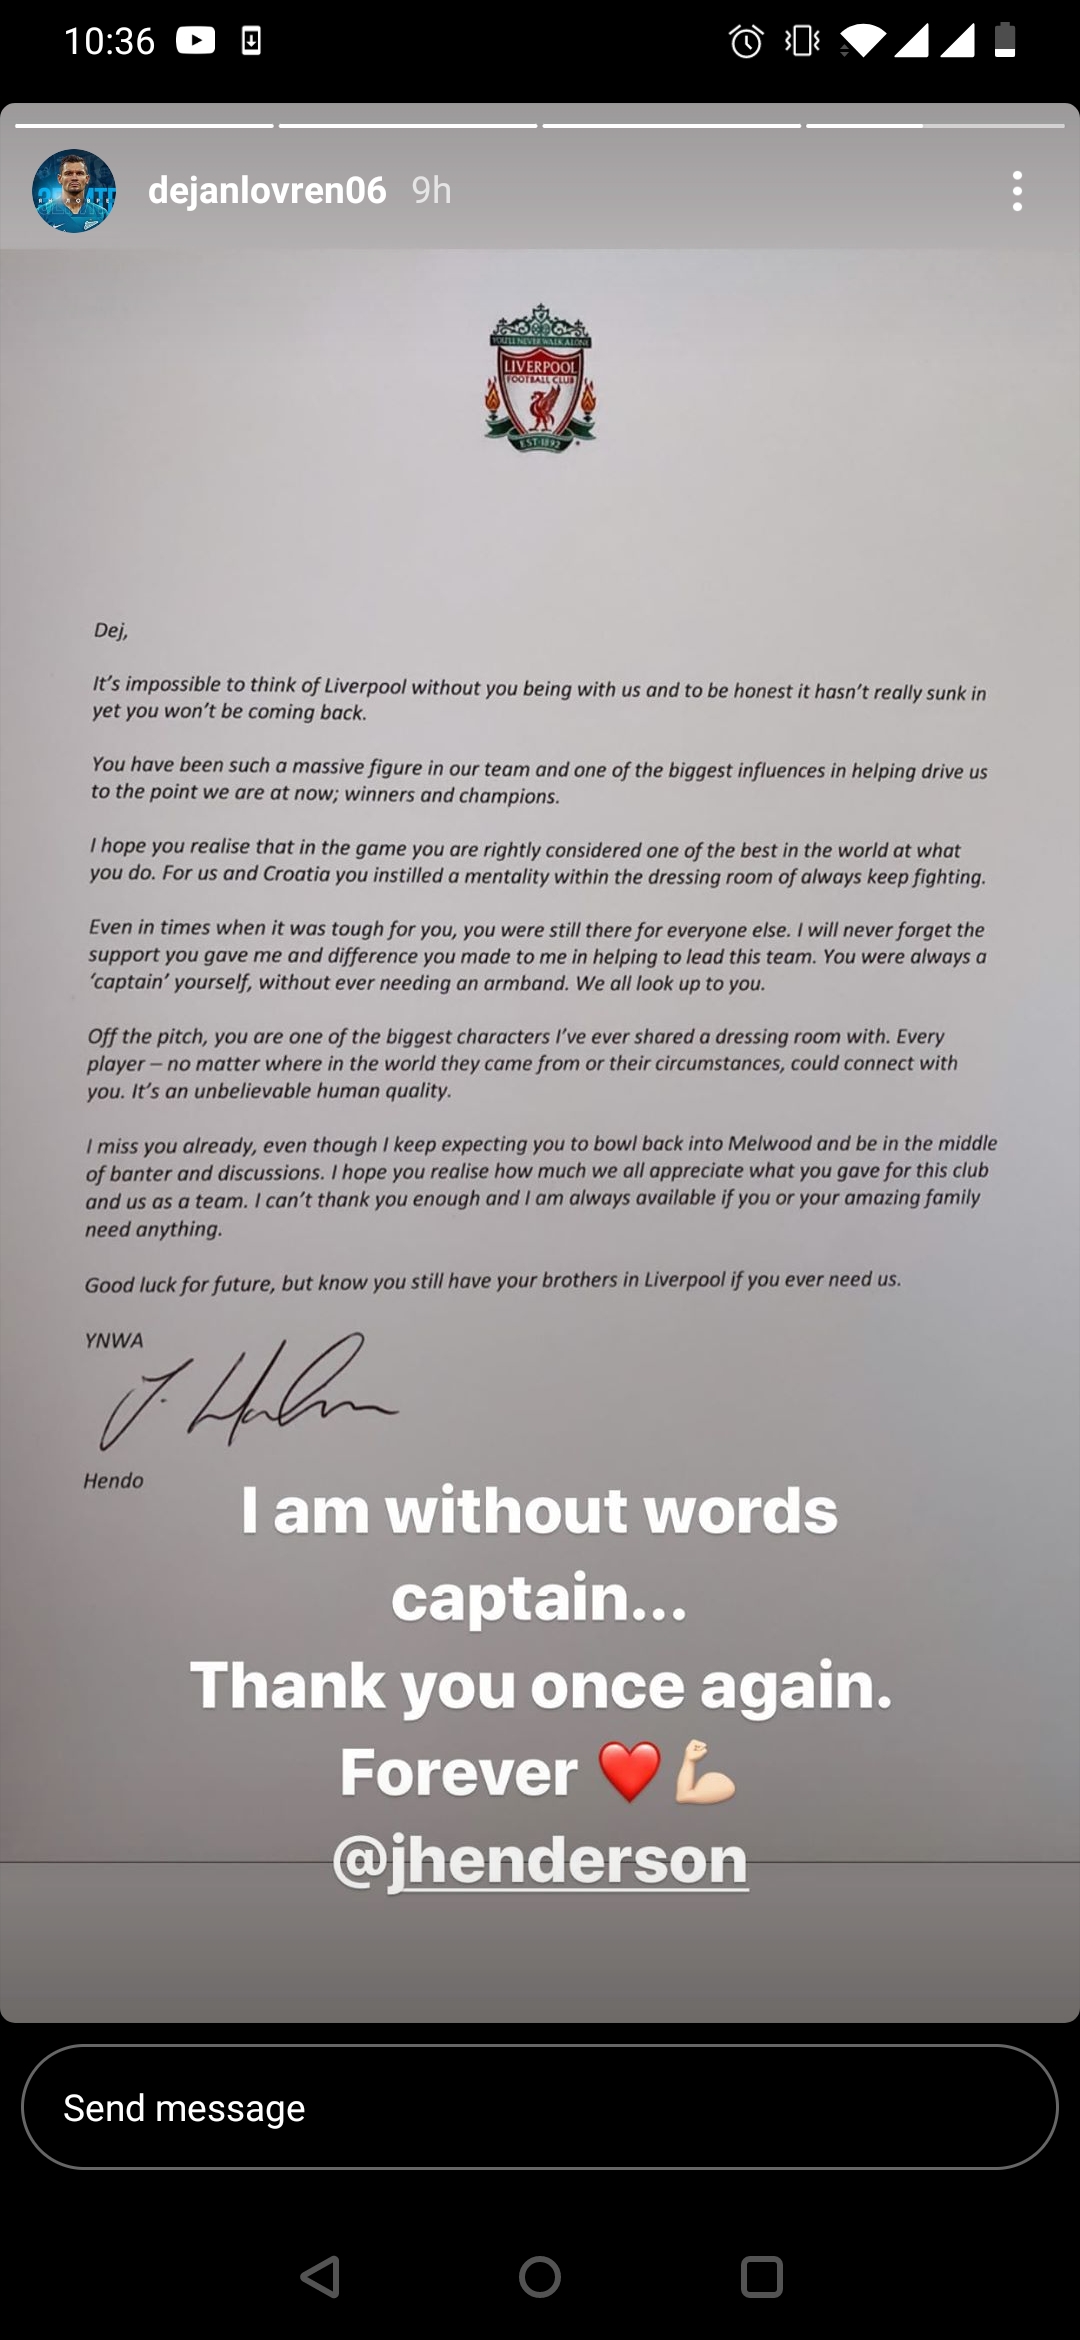 Hendo's letter to lovren. Pure class from the captain!